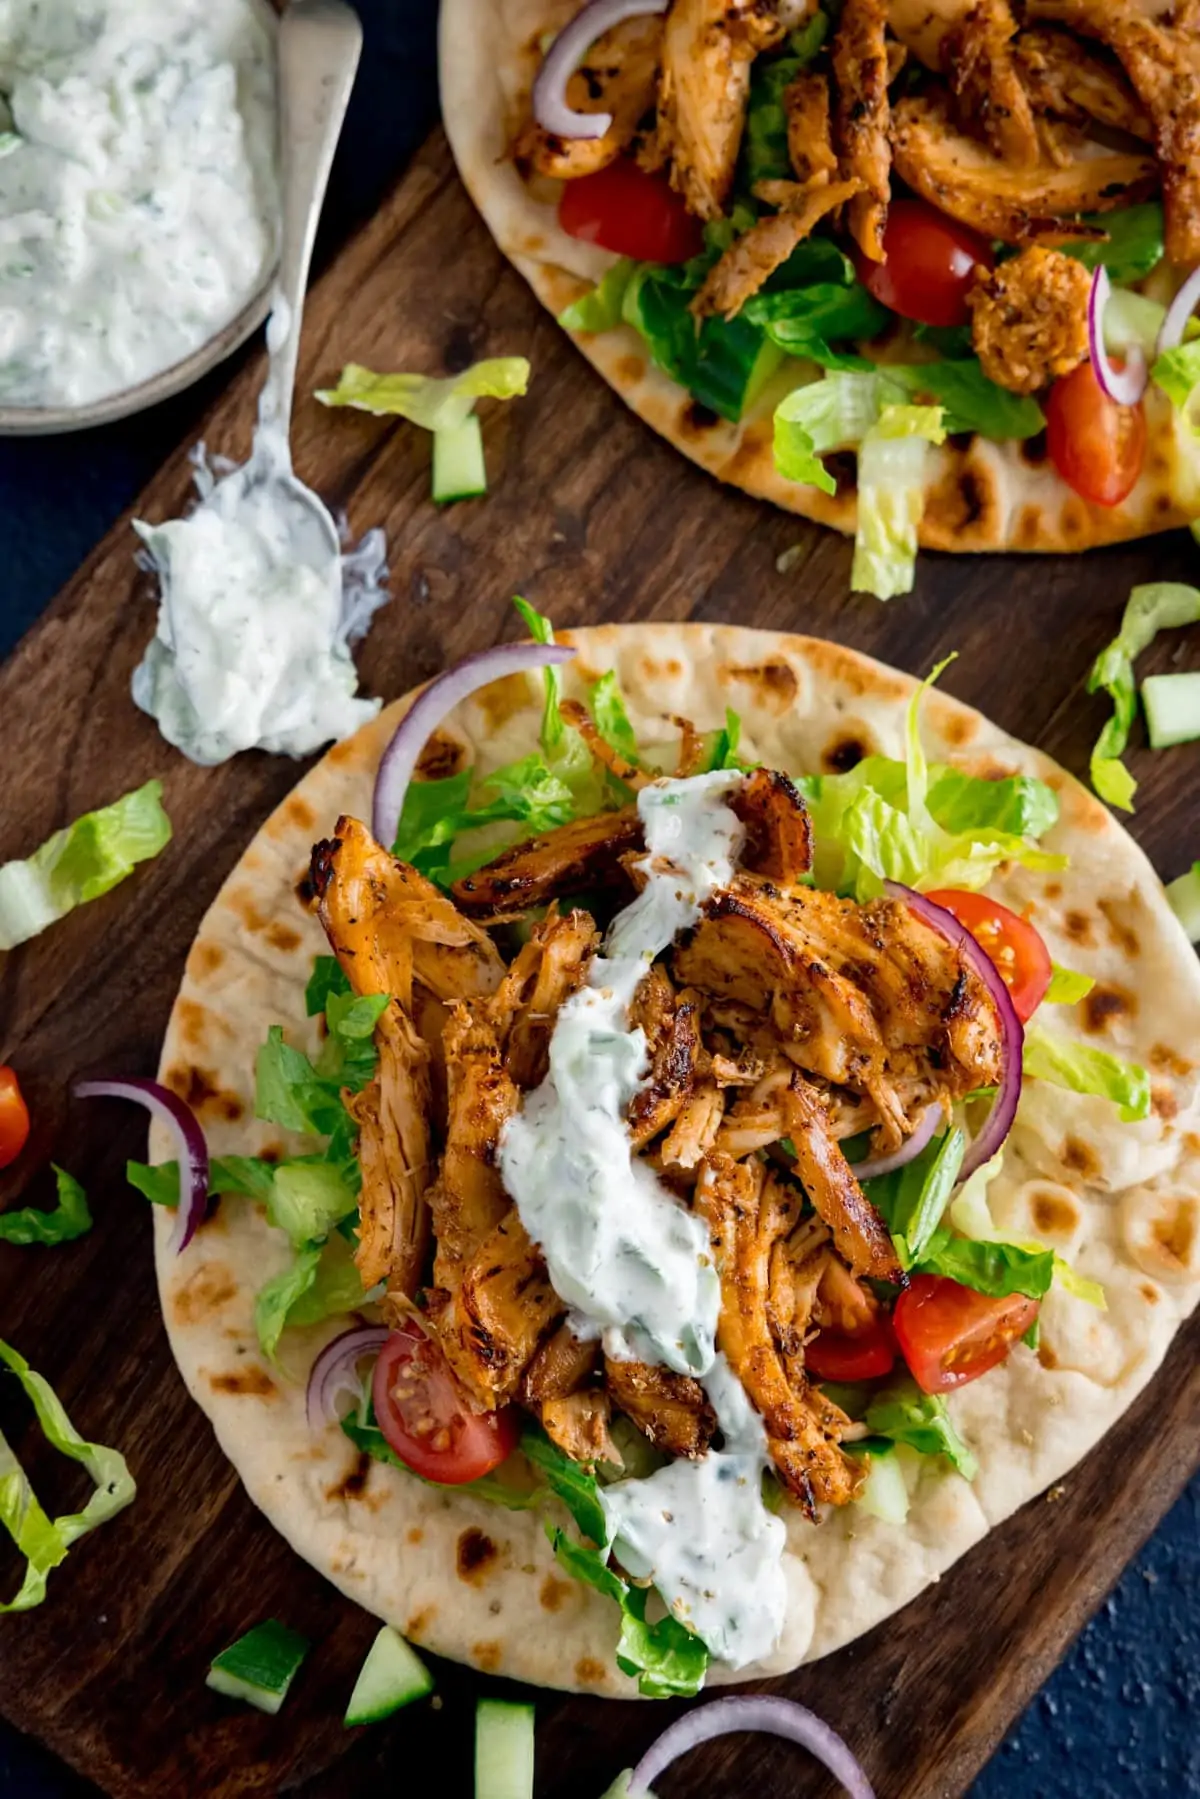 Chicken gyros with salad and tzatziki on an unrolled flatbread, on a wooden board. A further gyros flatbread and a bowl and spoon with tzatziki on is also in shot.